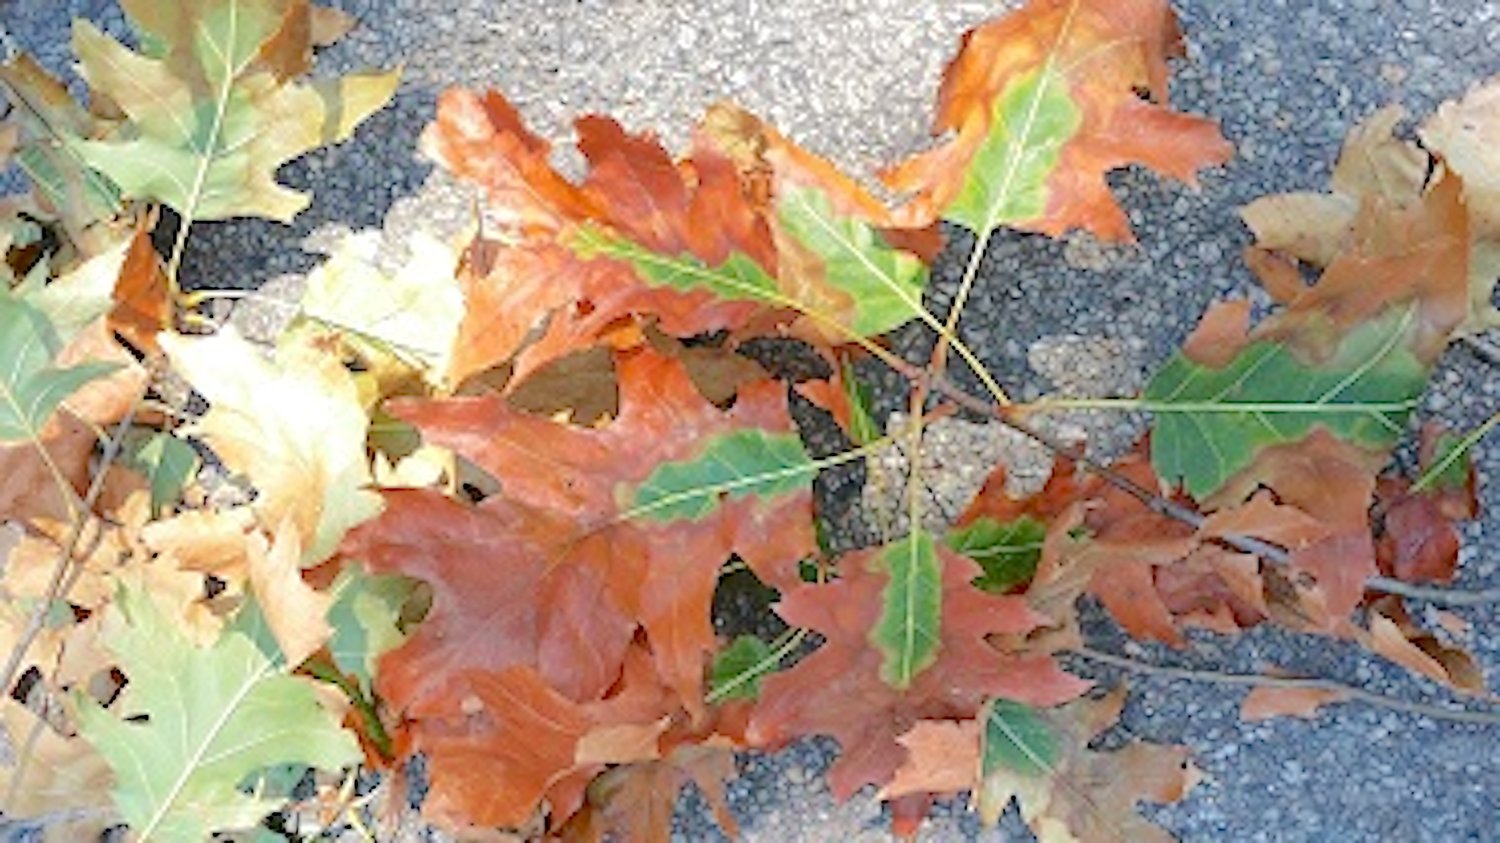 Symptomatic leaves from an oak wilt infected tree.